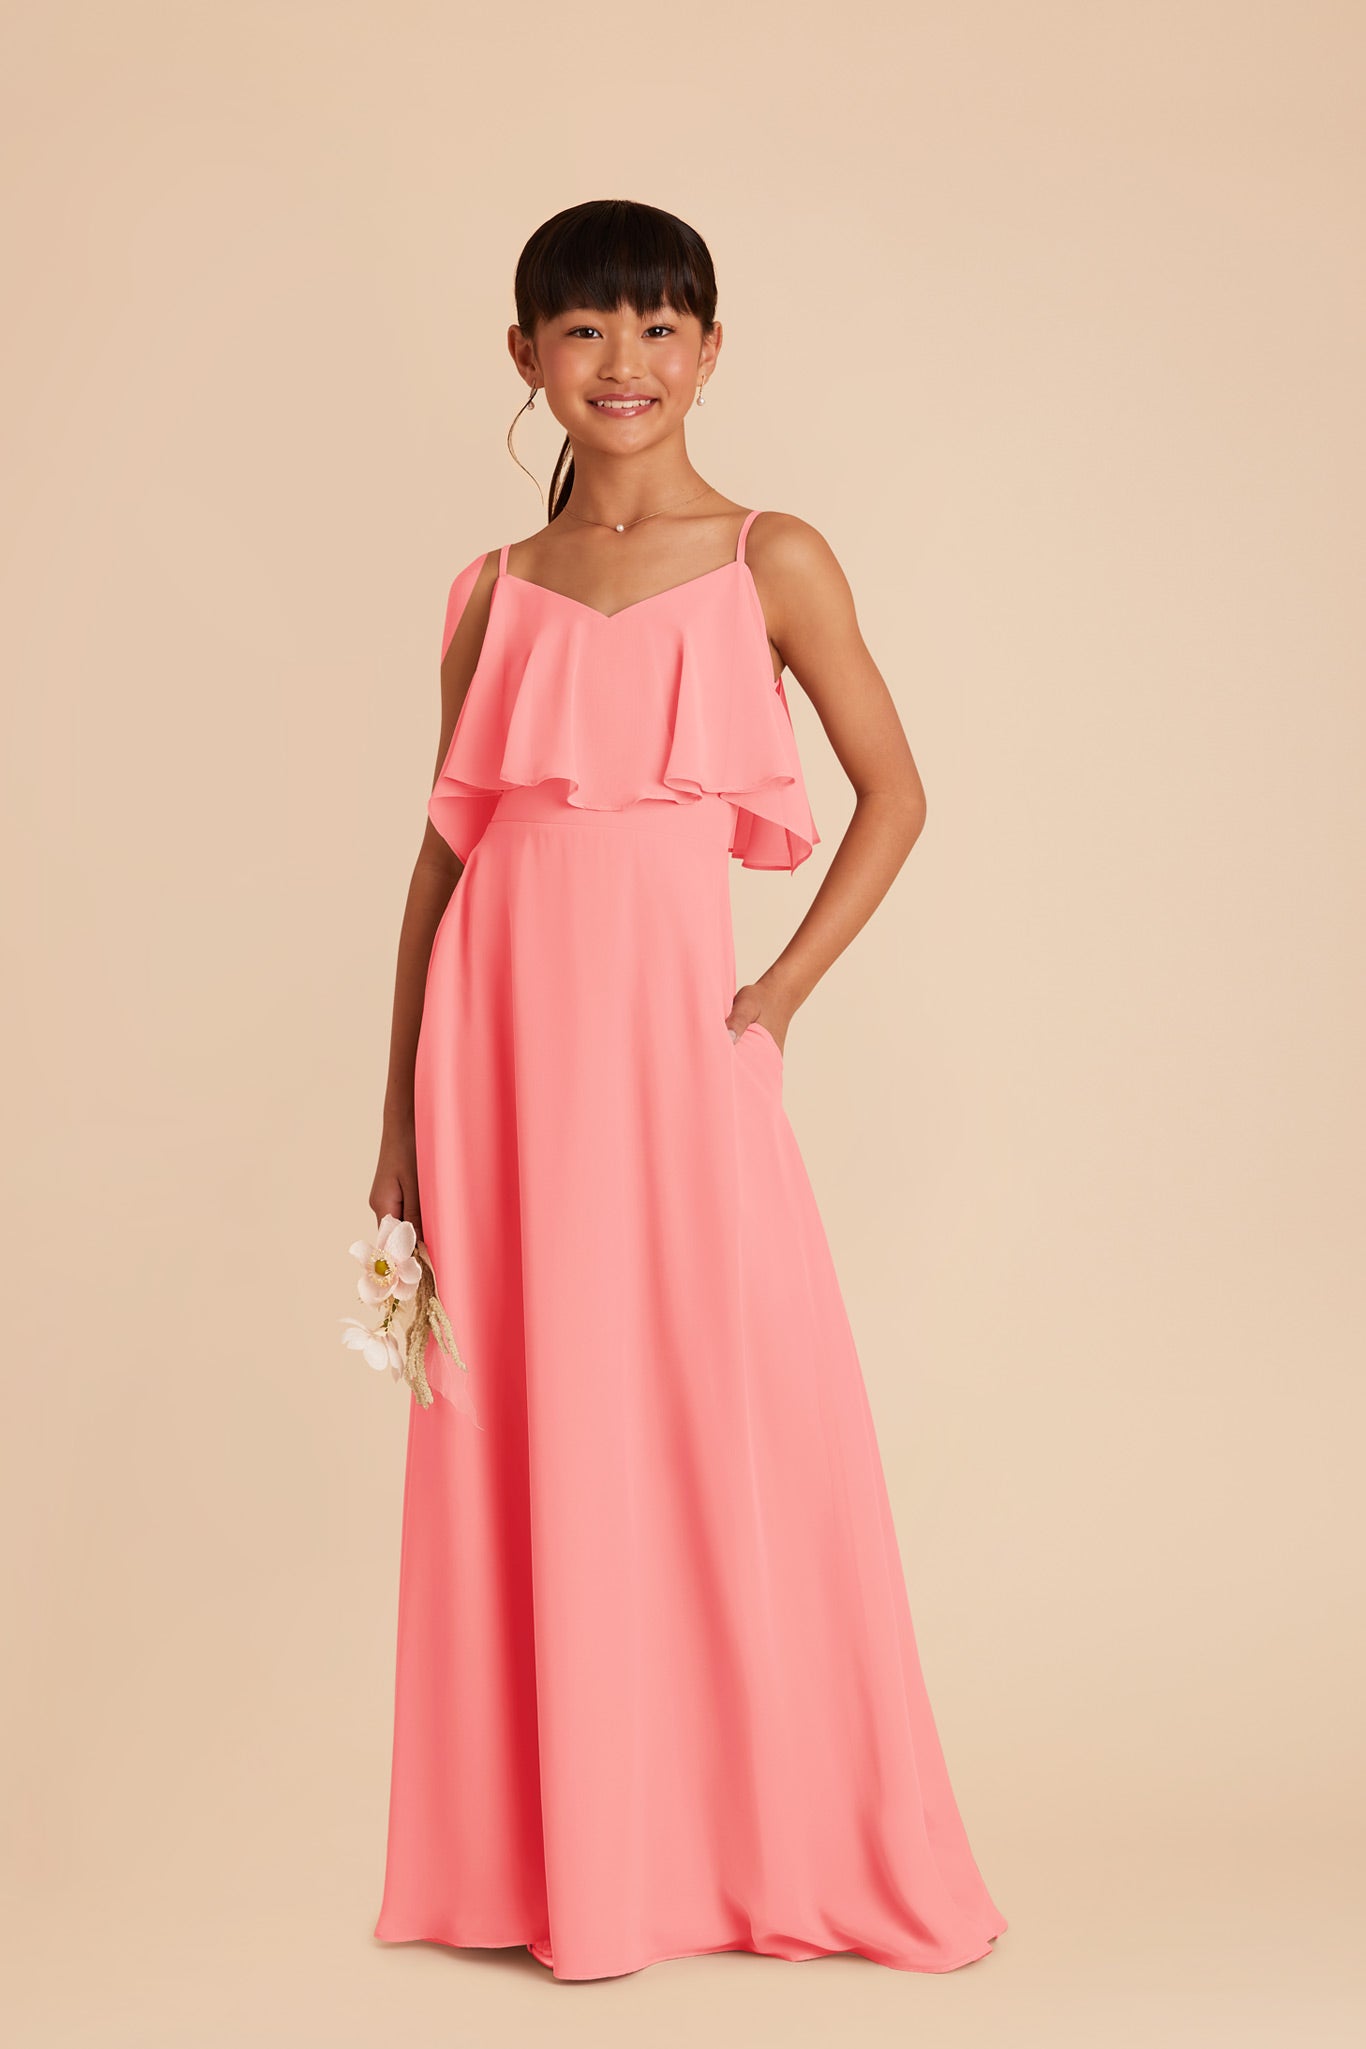 Coral Pink Janie Convertible Junior Dress by Birdy Grey